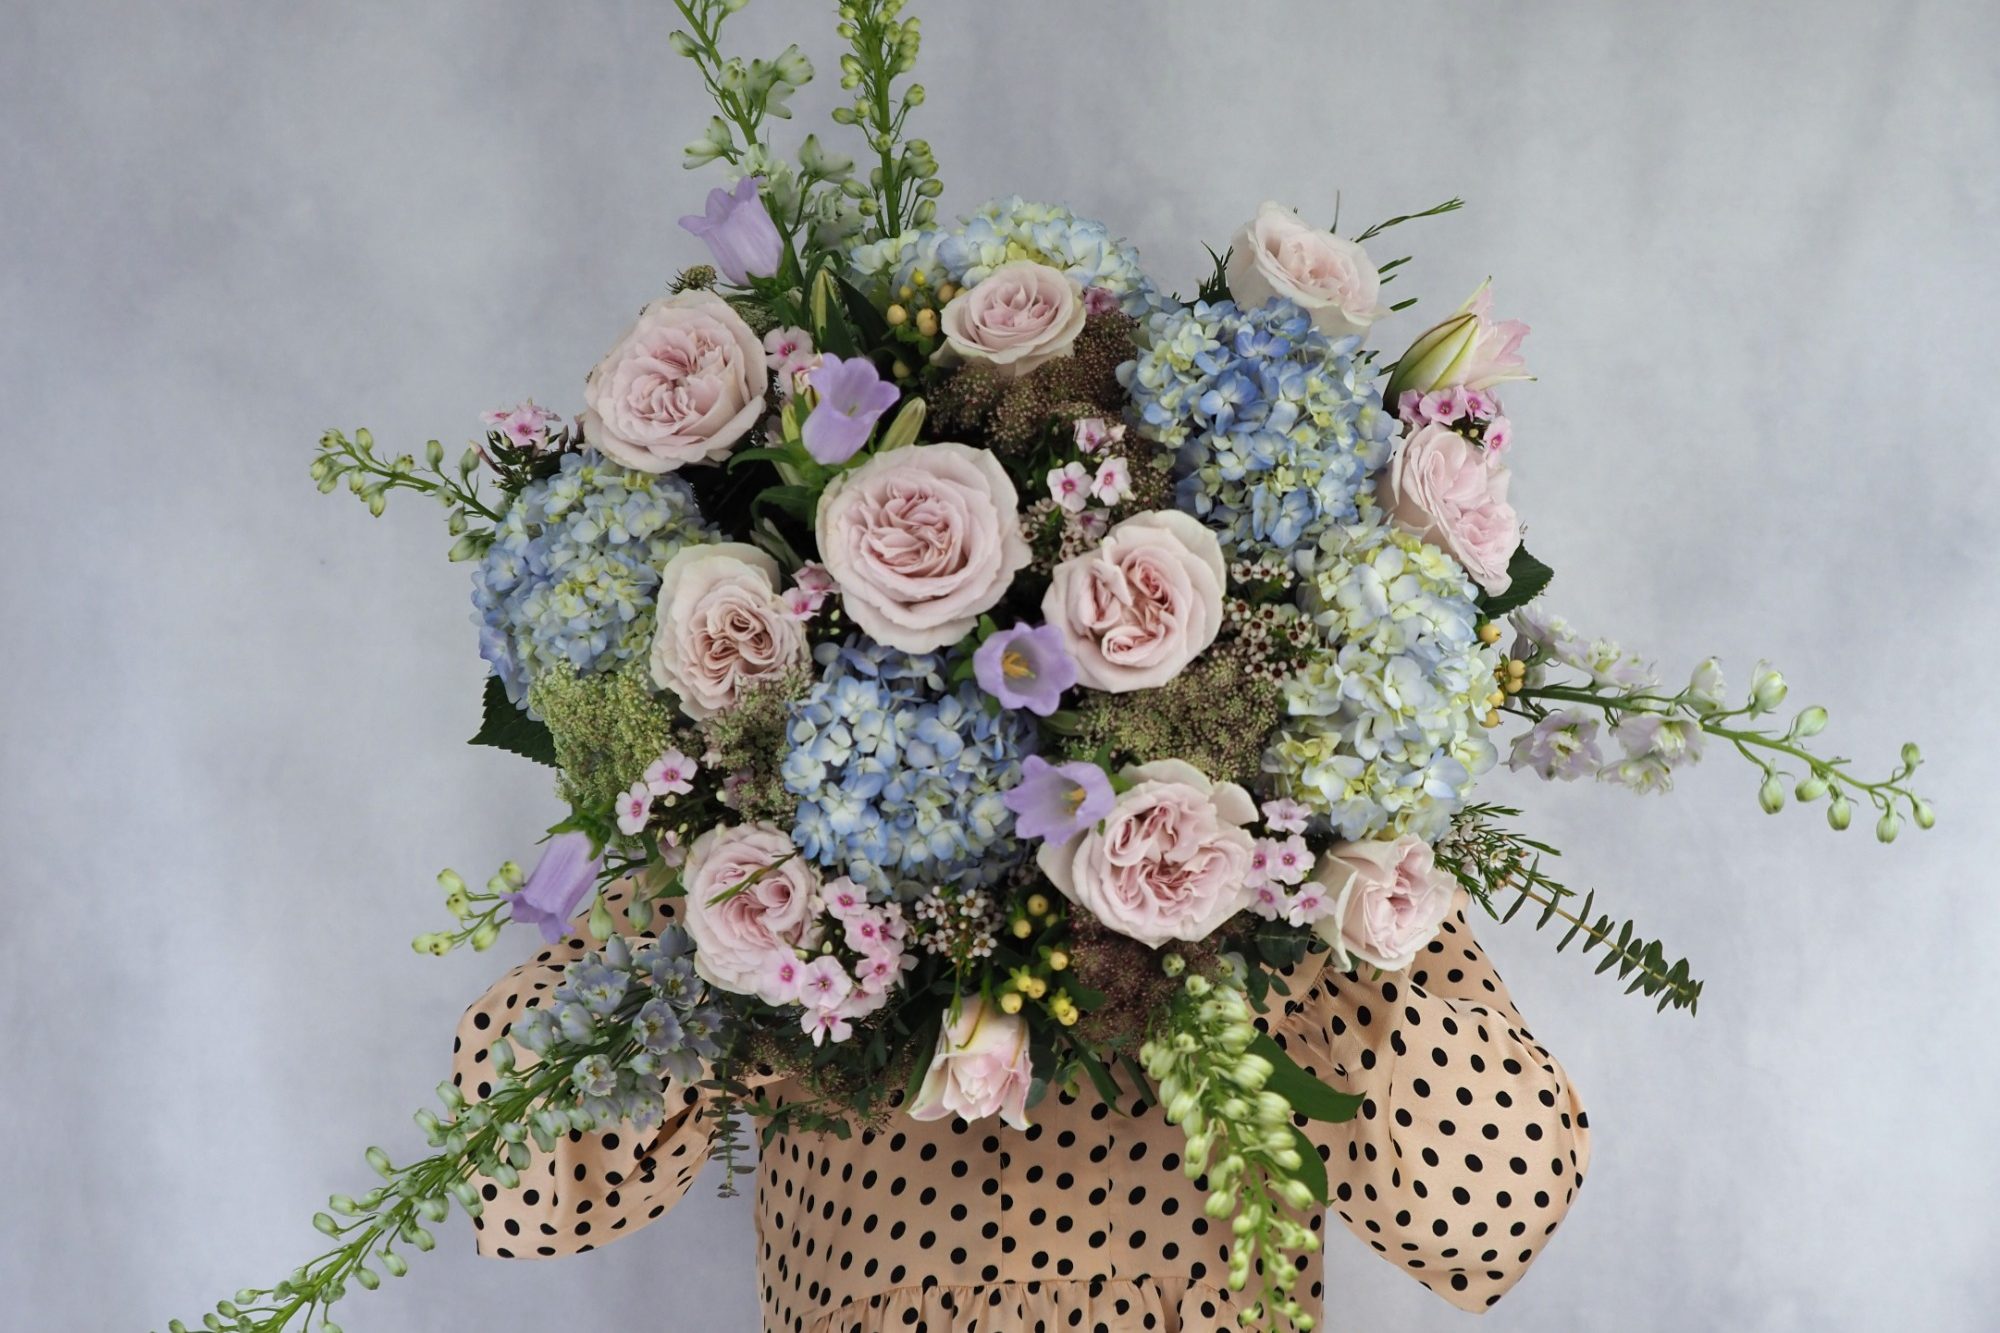 Luxurious domed and structured bouquet containing scented lilac garden roses, pale blue hydrangeas and complimenting pastel flowers. Beautifully arranged and hand tied. 